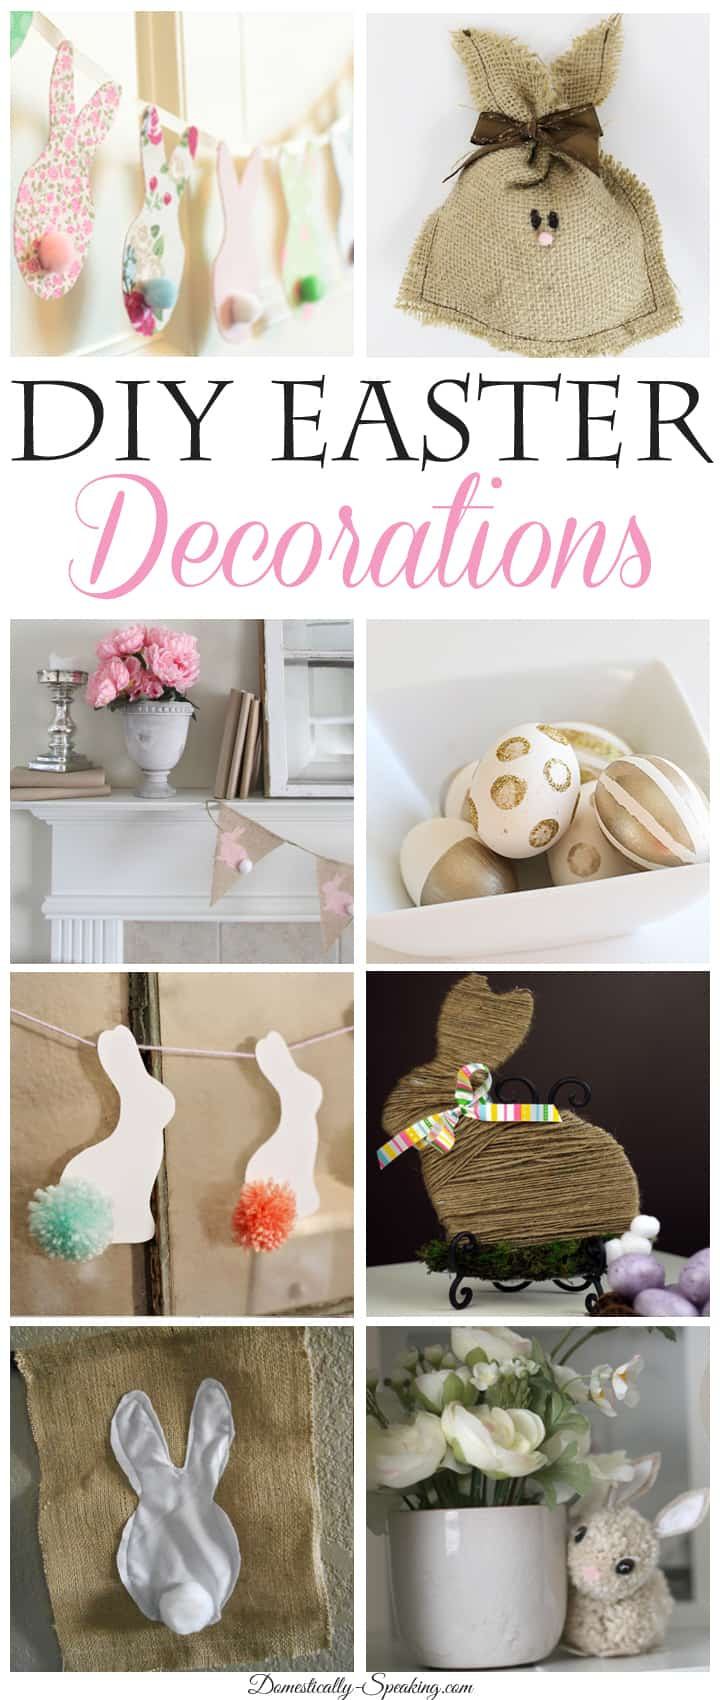 DIY Easter Decorations
 Inspire Me Monday 52 Domestically Speaking